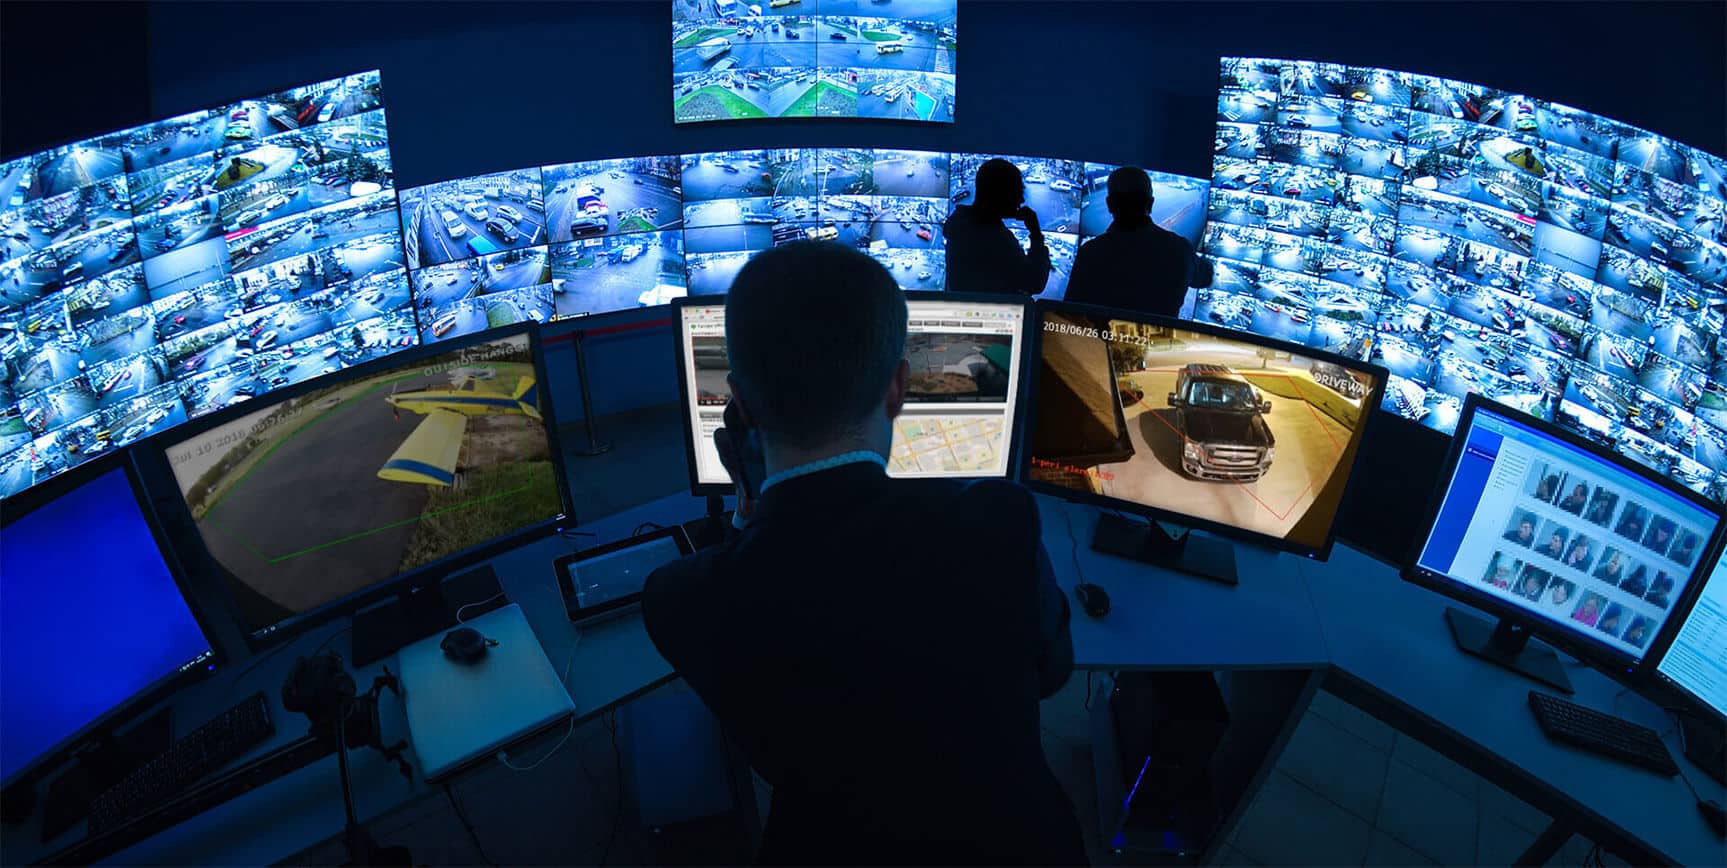 Acadian Total Security Monitoring Center